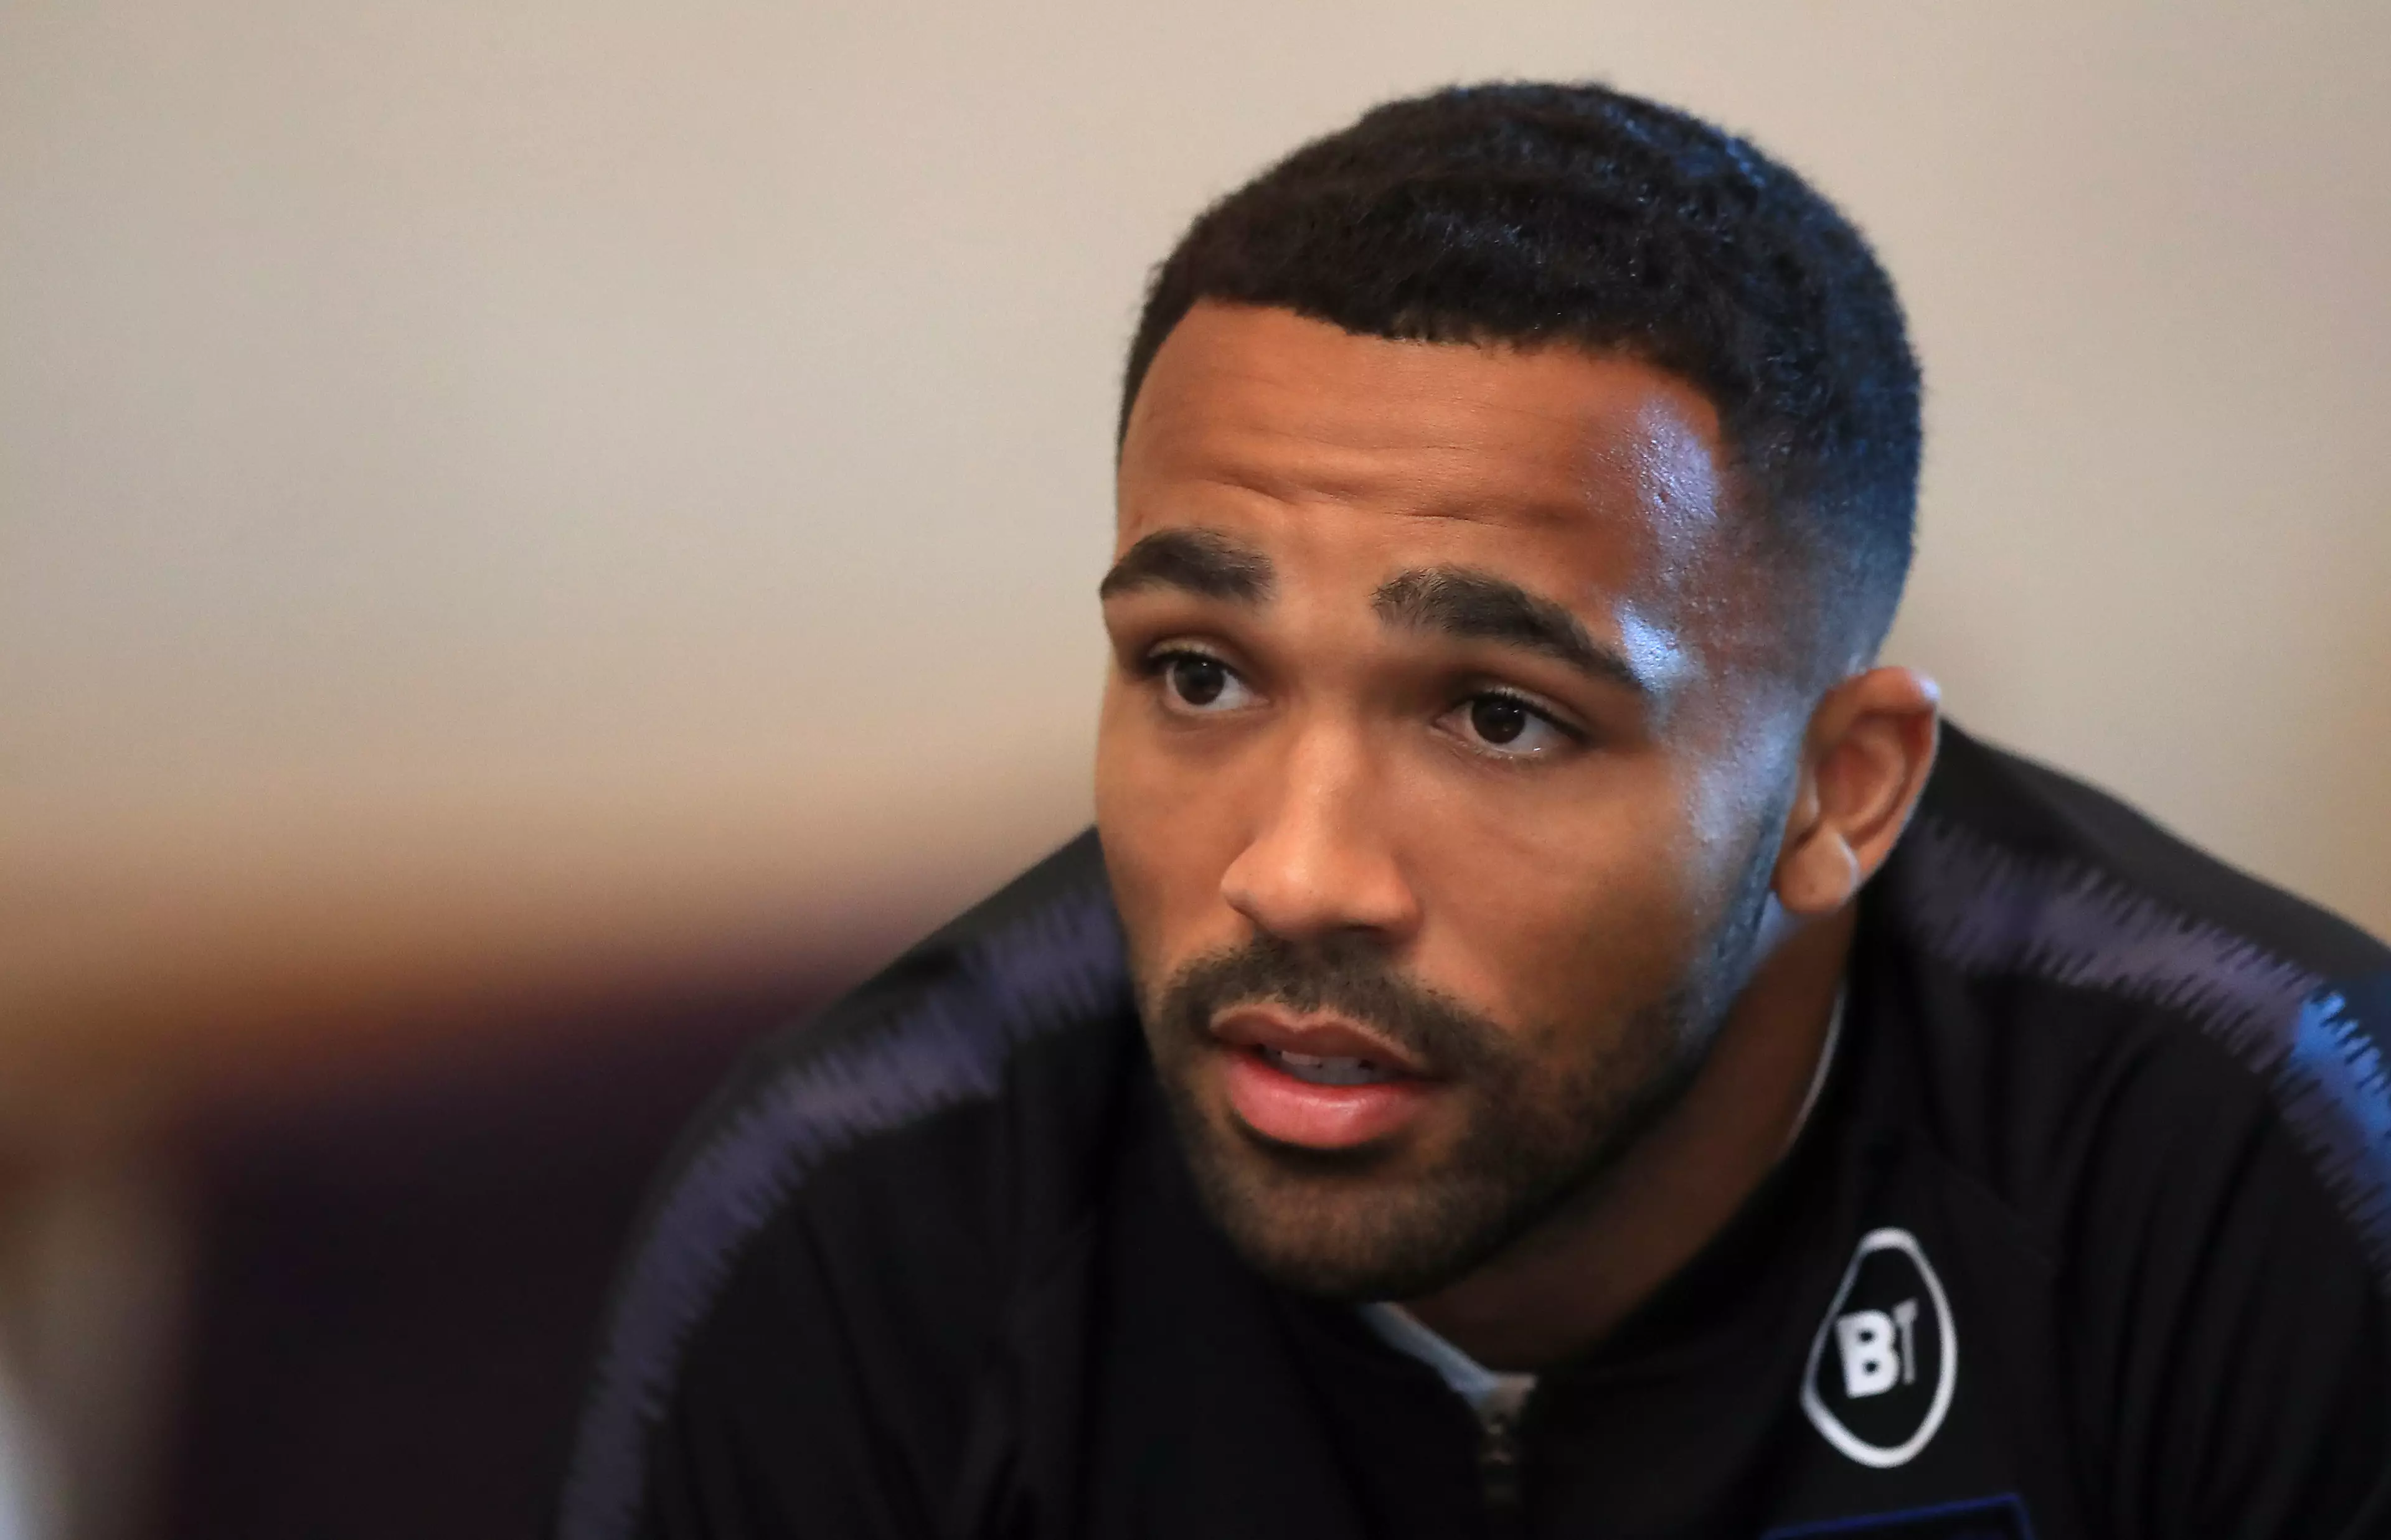 Callum Wilson wants to be a regular in the England side and play in the Euros on home soil next summer